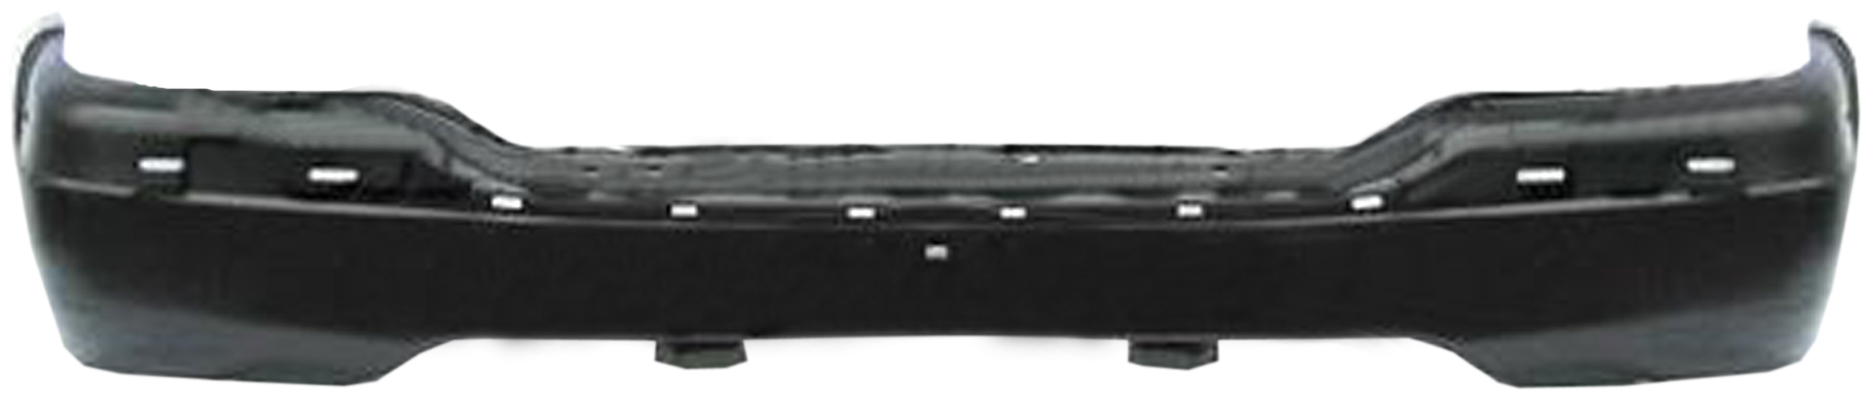 Aftermarket METAL FRONT BUMPERS for CHEVROLET - SUBURBAN 1500, SUBURBAN 1500,00-06,Front bumper face bar